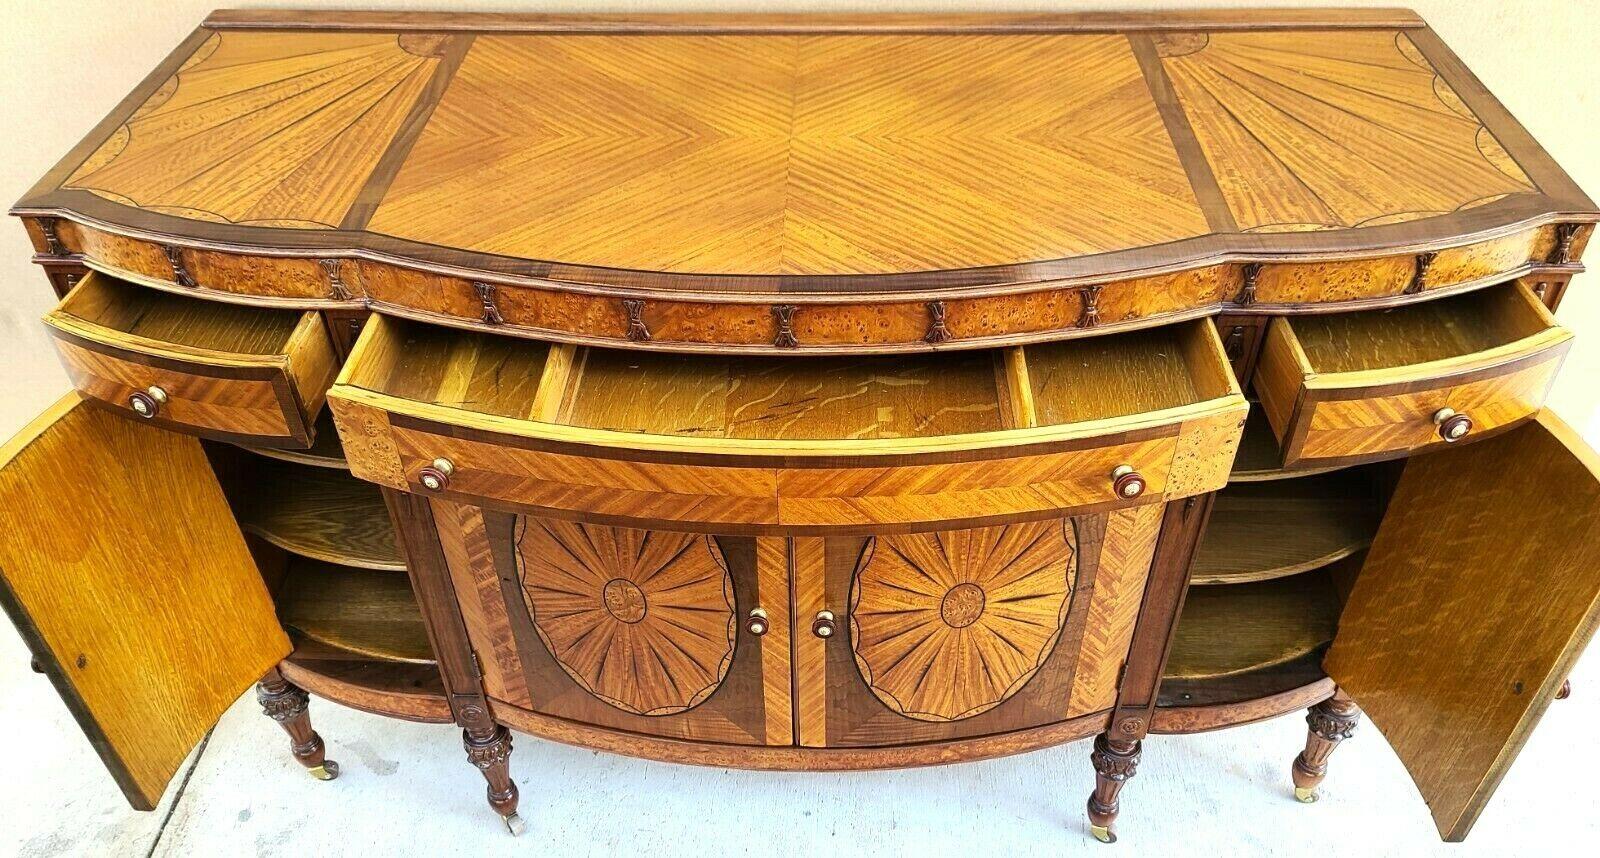 Offering One Of Our Recent Palm Beach Estate Fine Furniture Acquisitions Of An 
Antique early 1900s Art Nouveau Amboyna burl hand carved walnut sideboard buffet

Approximate Measurements in Inches
36